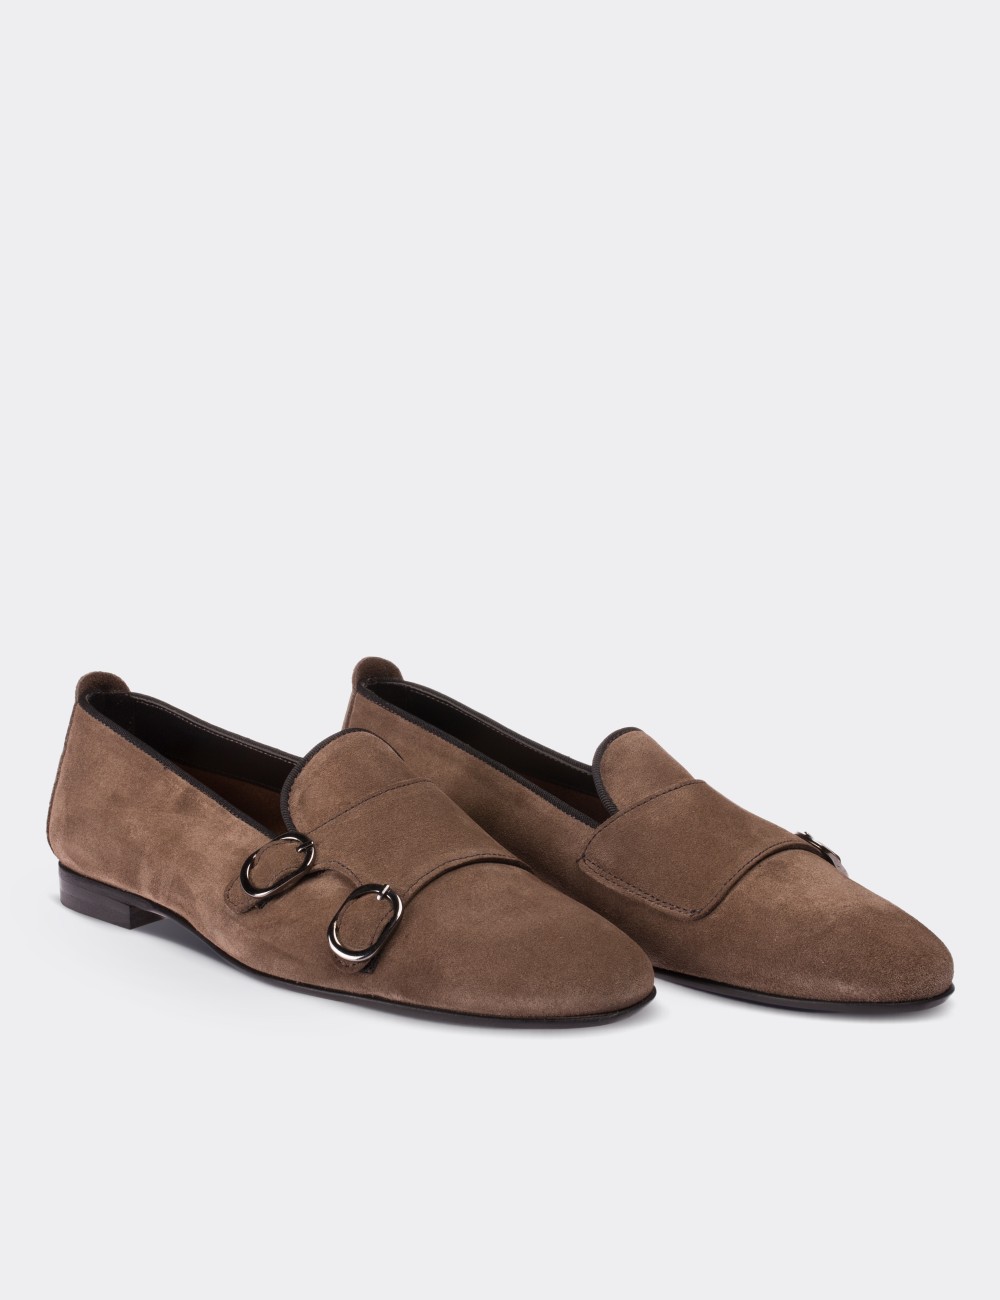 Sandstone Suede Leather Loafers - 01611ZVZNM01